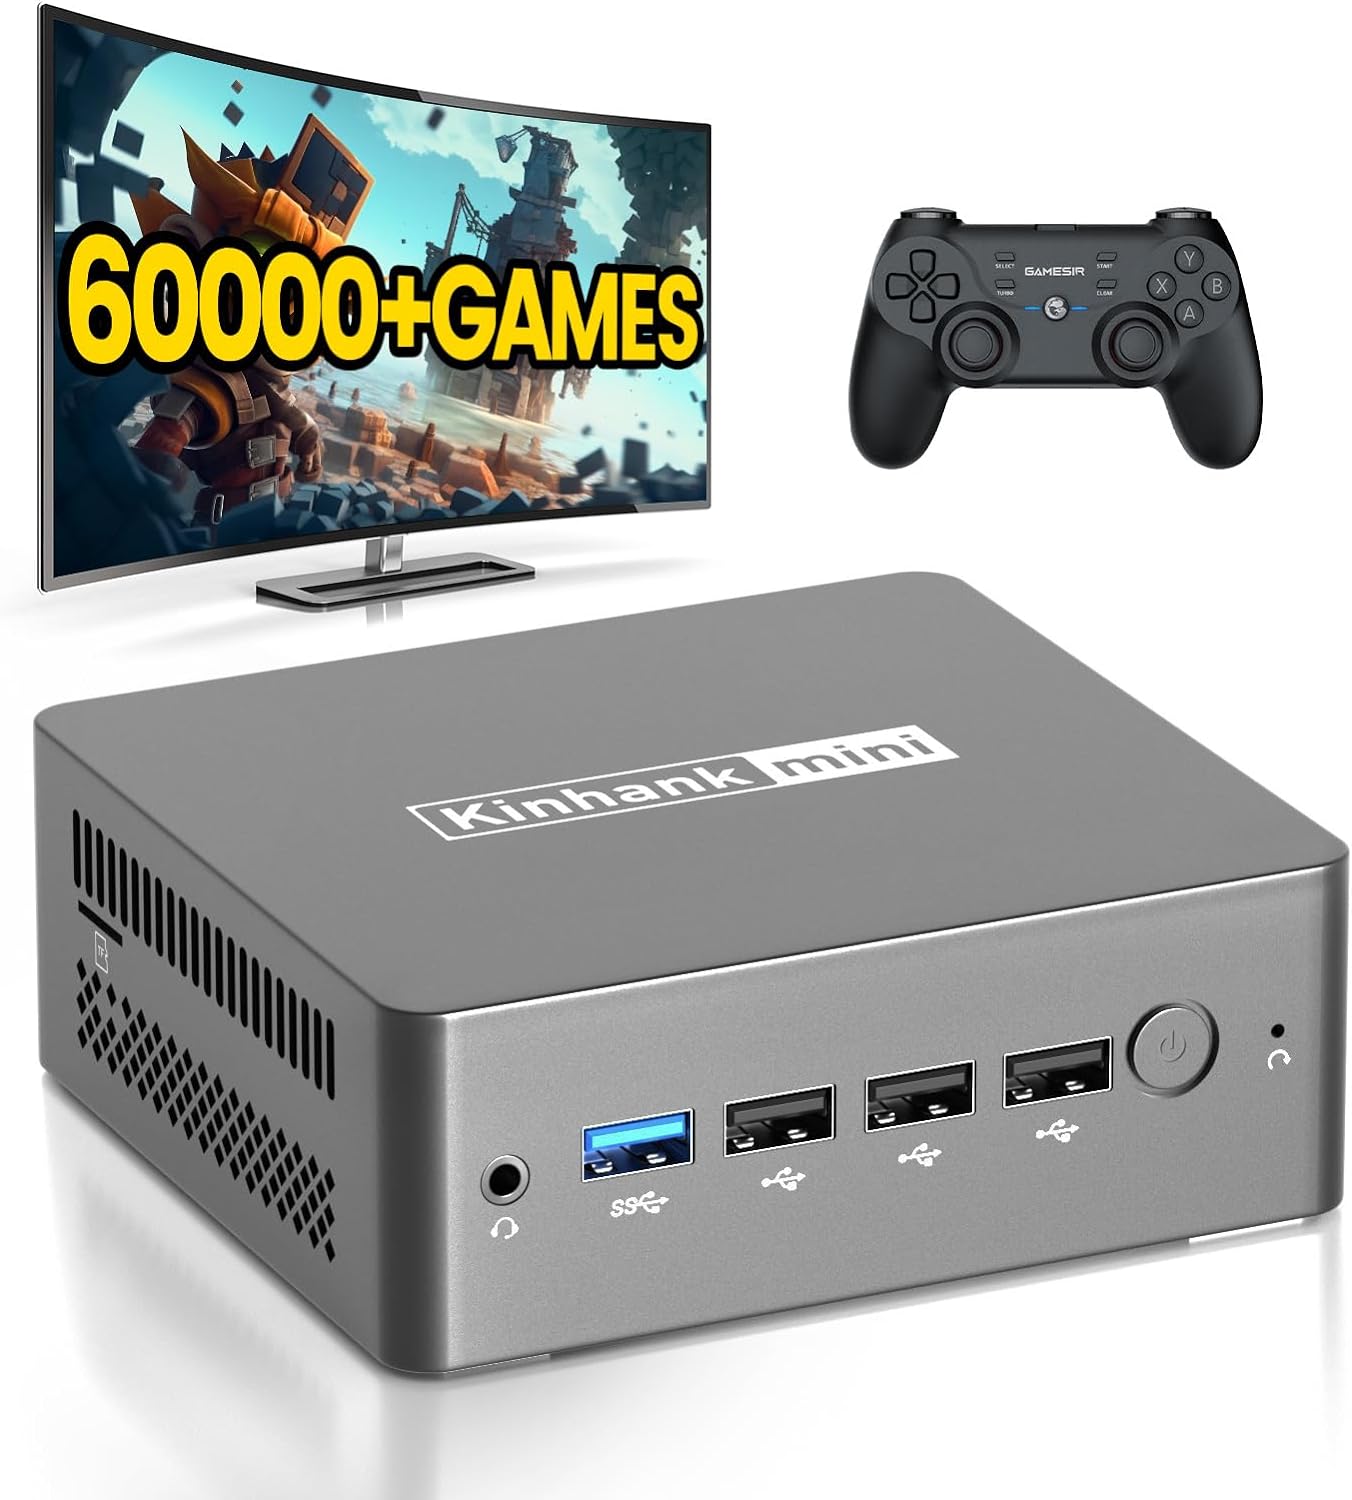 Mini PC Intel N100 (up to 3.4GHz) Mini Computer Windows 11, Small PC 8GB DDR5+256GB+500G External HDD, Built in 60,000+Games,4K Dual Display/WiFi 5/BT 4.2/Micro Desktop Computer for Home Office